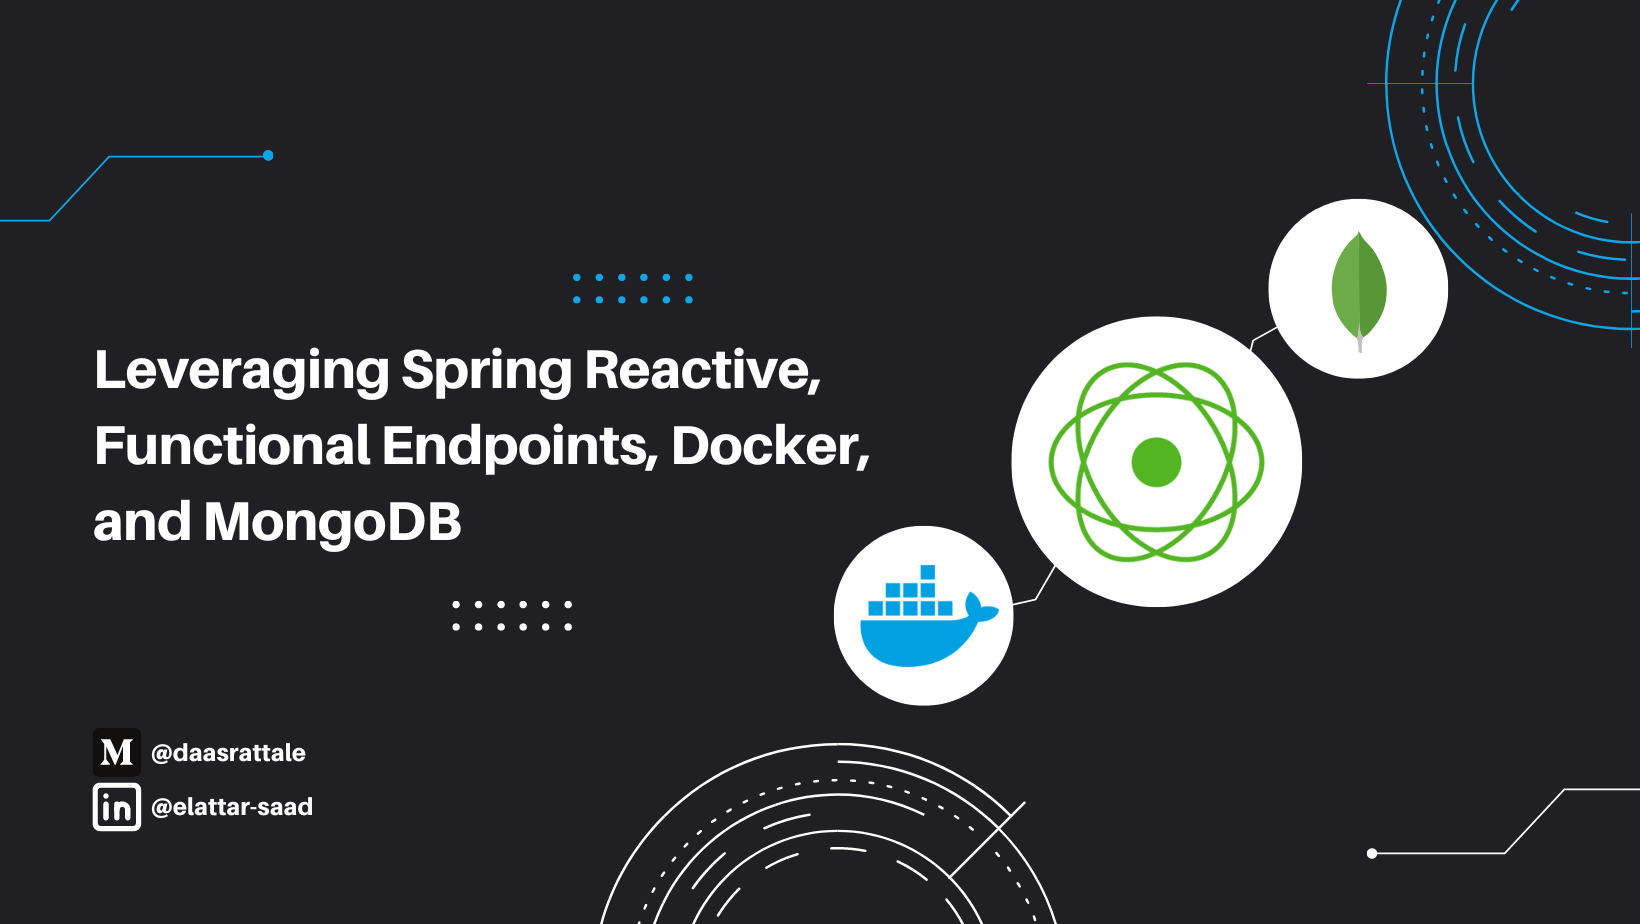 Leveraging Spring Reactive, Functional Endpoints, Docker, and MongoDB